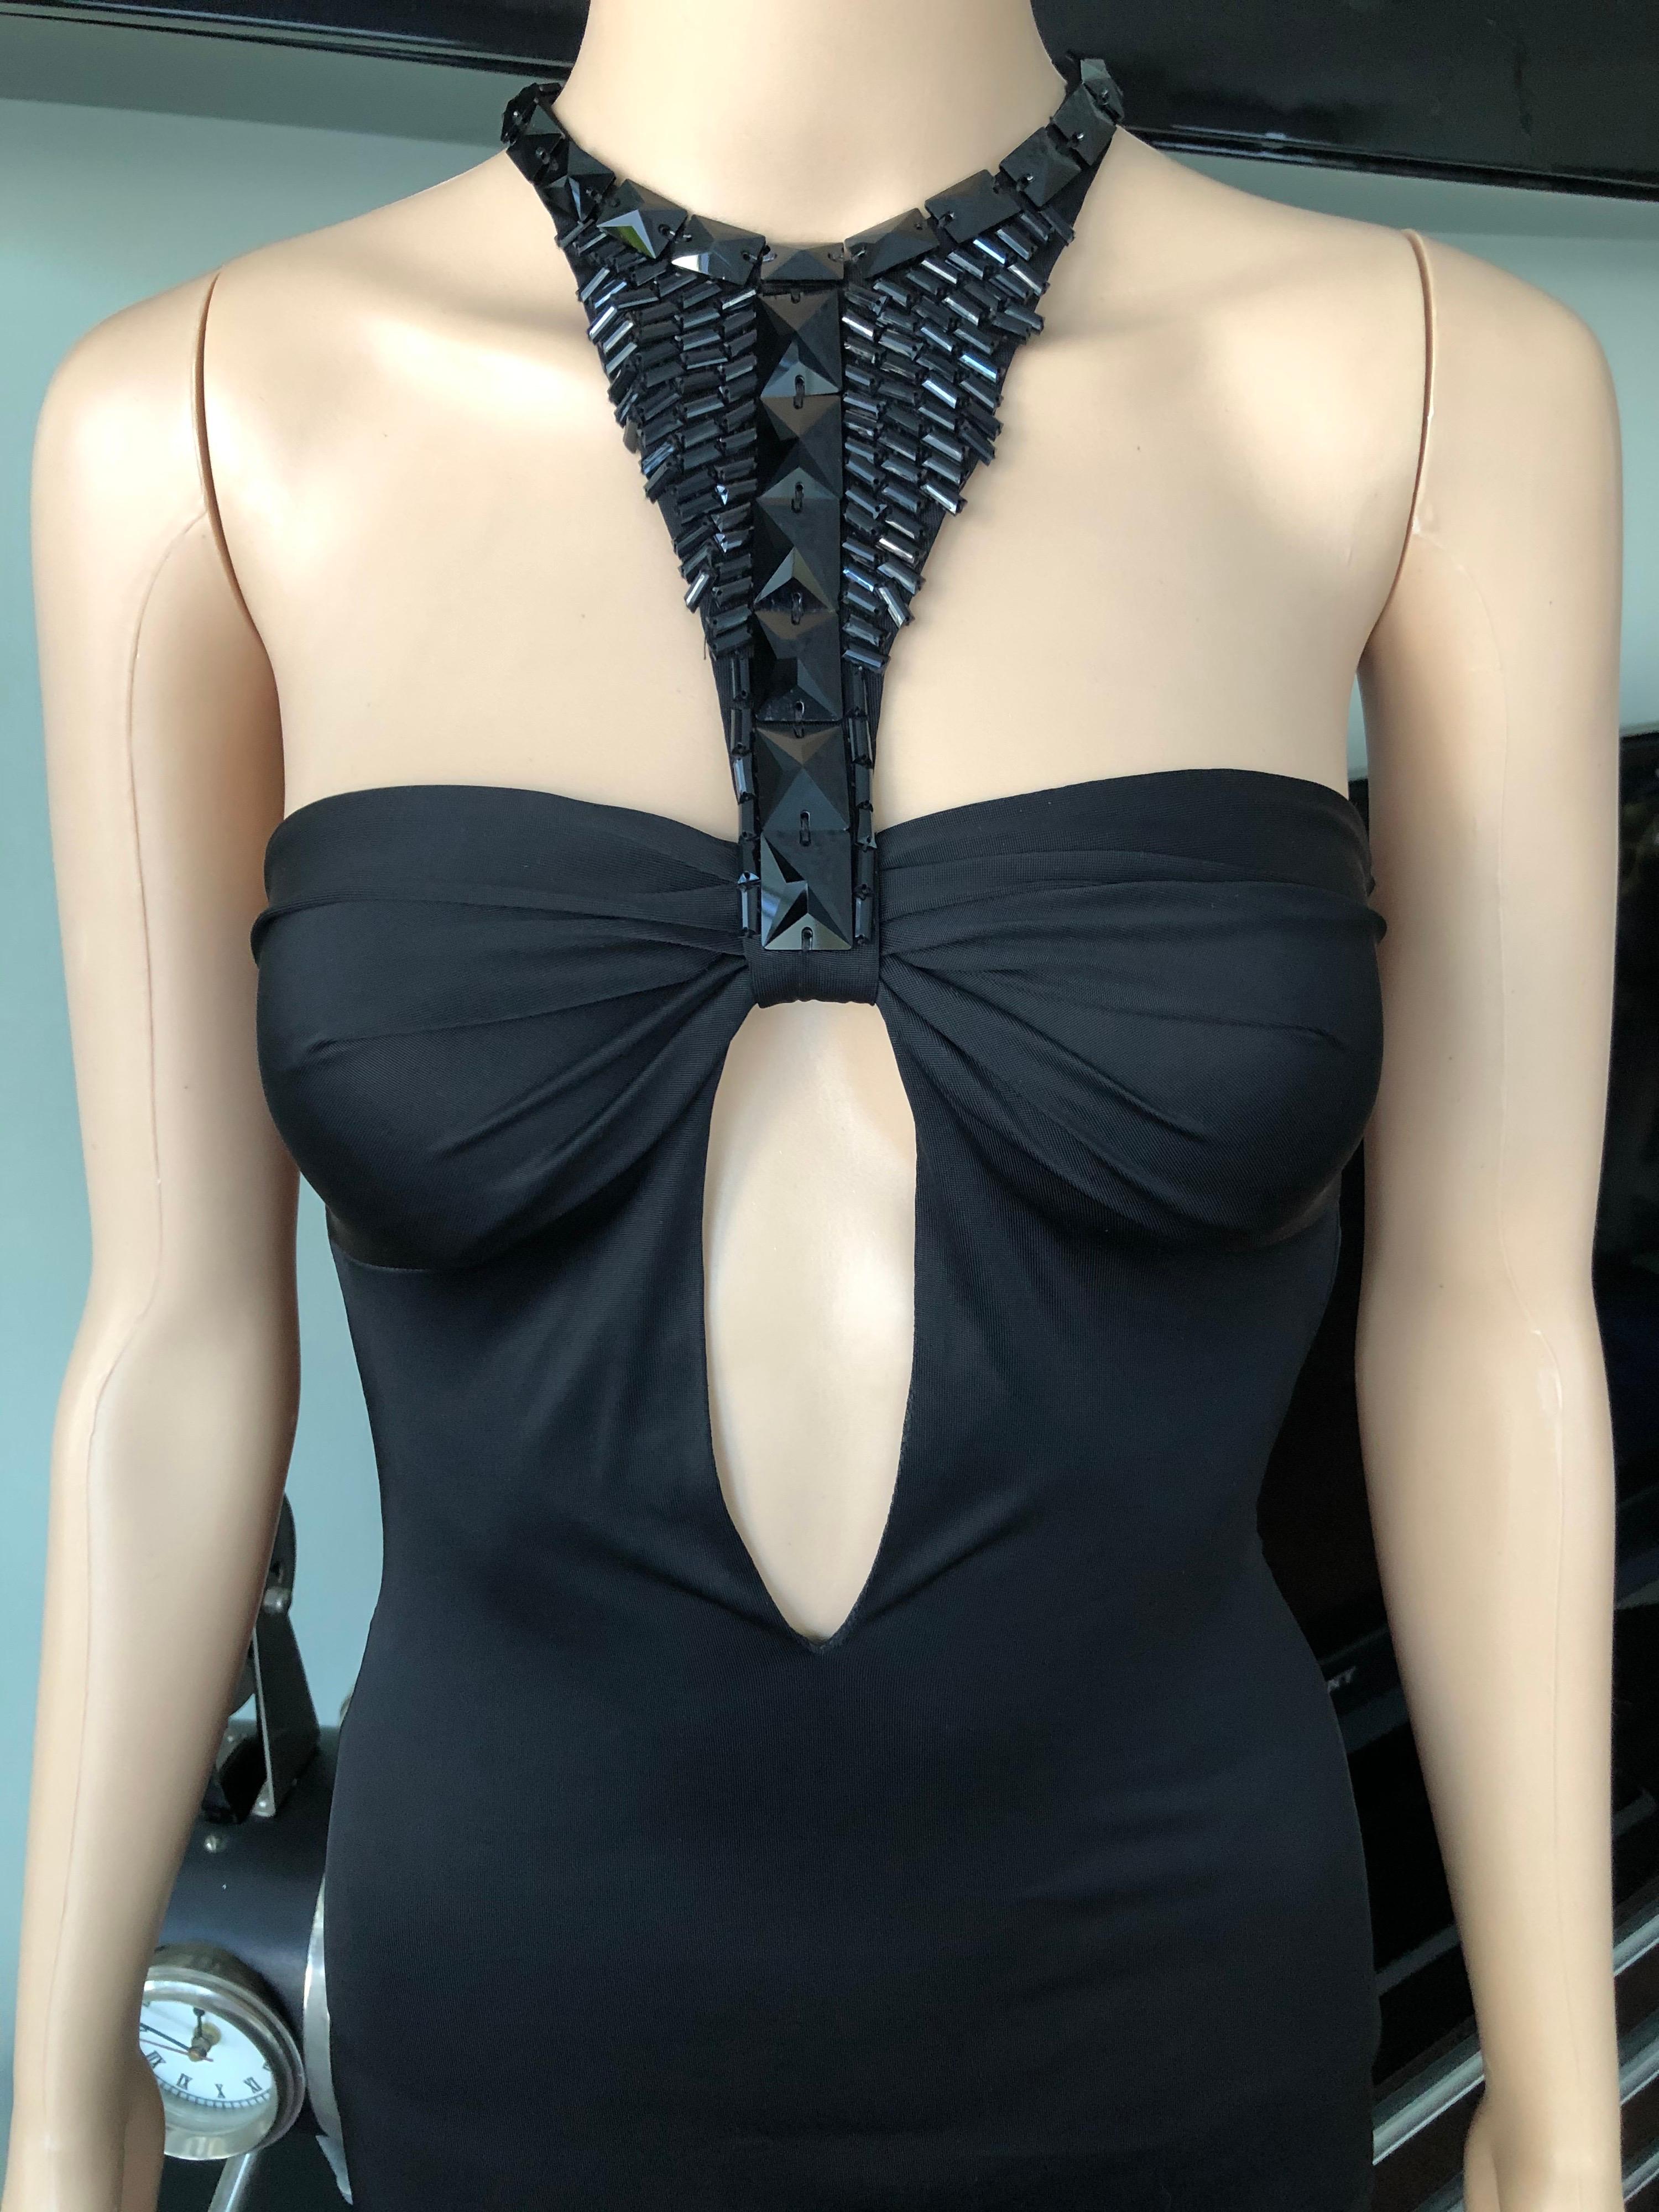 Tom Ford for Gucci F/W 2004 Embellished Plunging Cutout Black Evening Dress Gown In Good Condition For Sale In Naples, FL